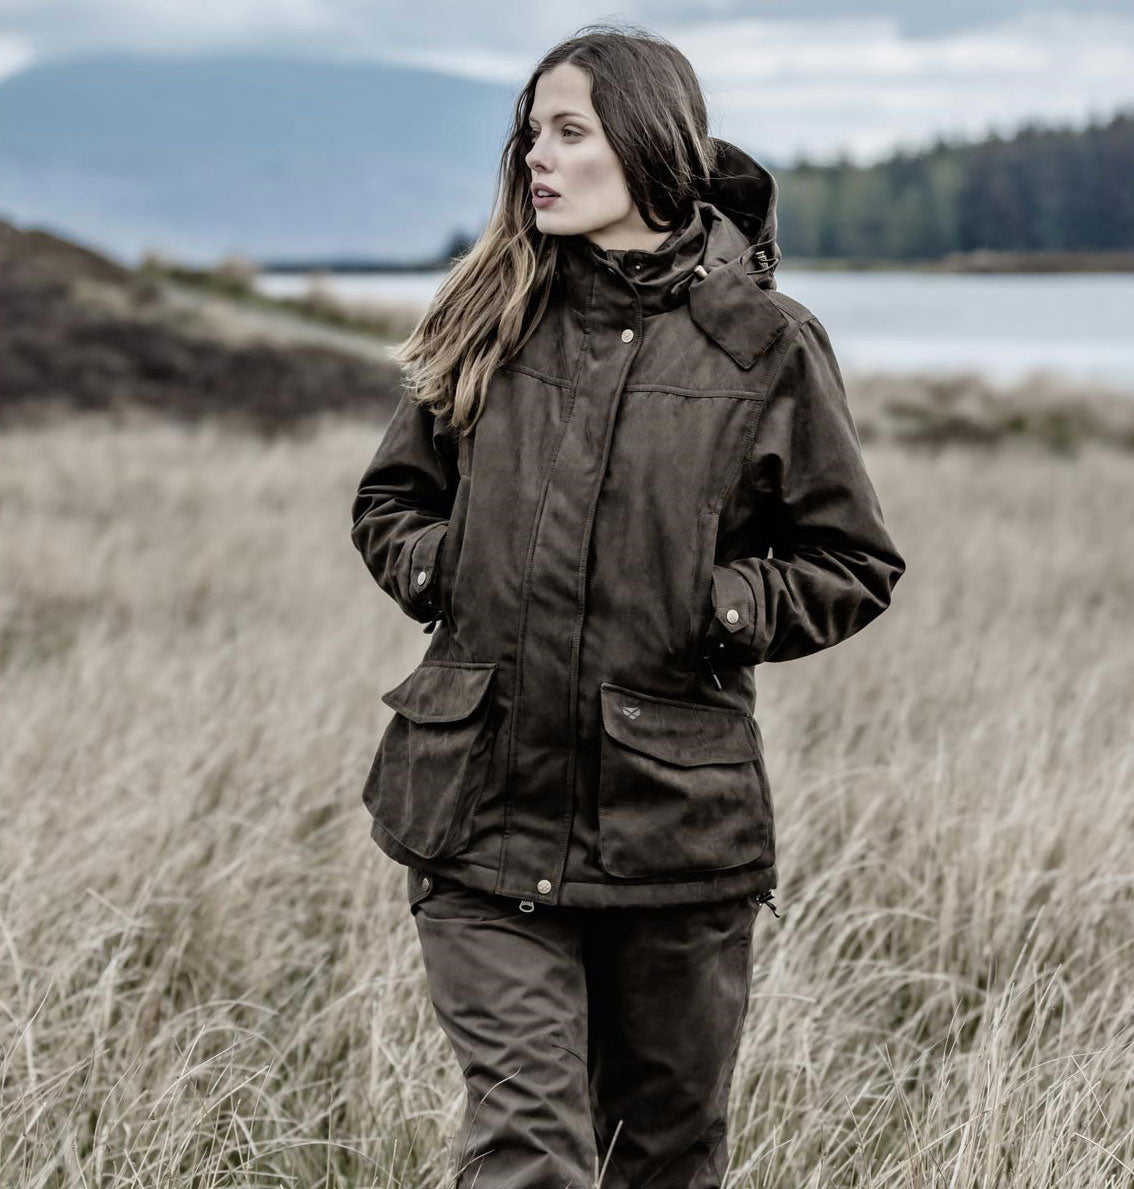 Ladies Rannoch Shooting outfit jacket and trousers